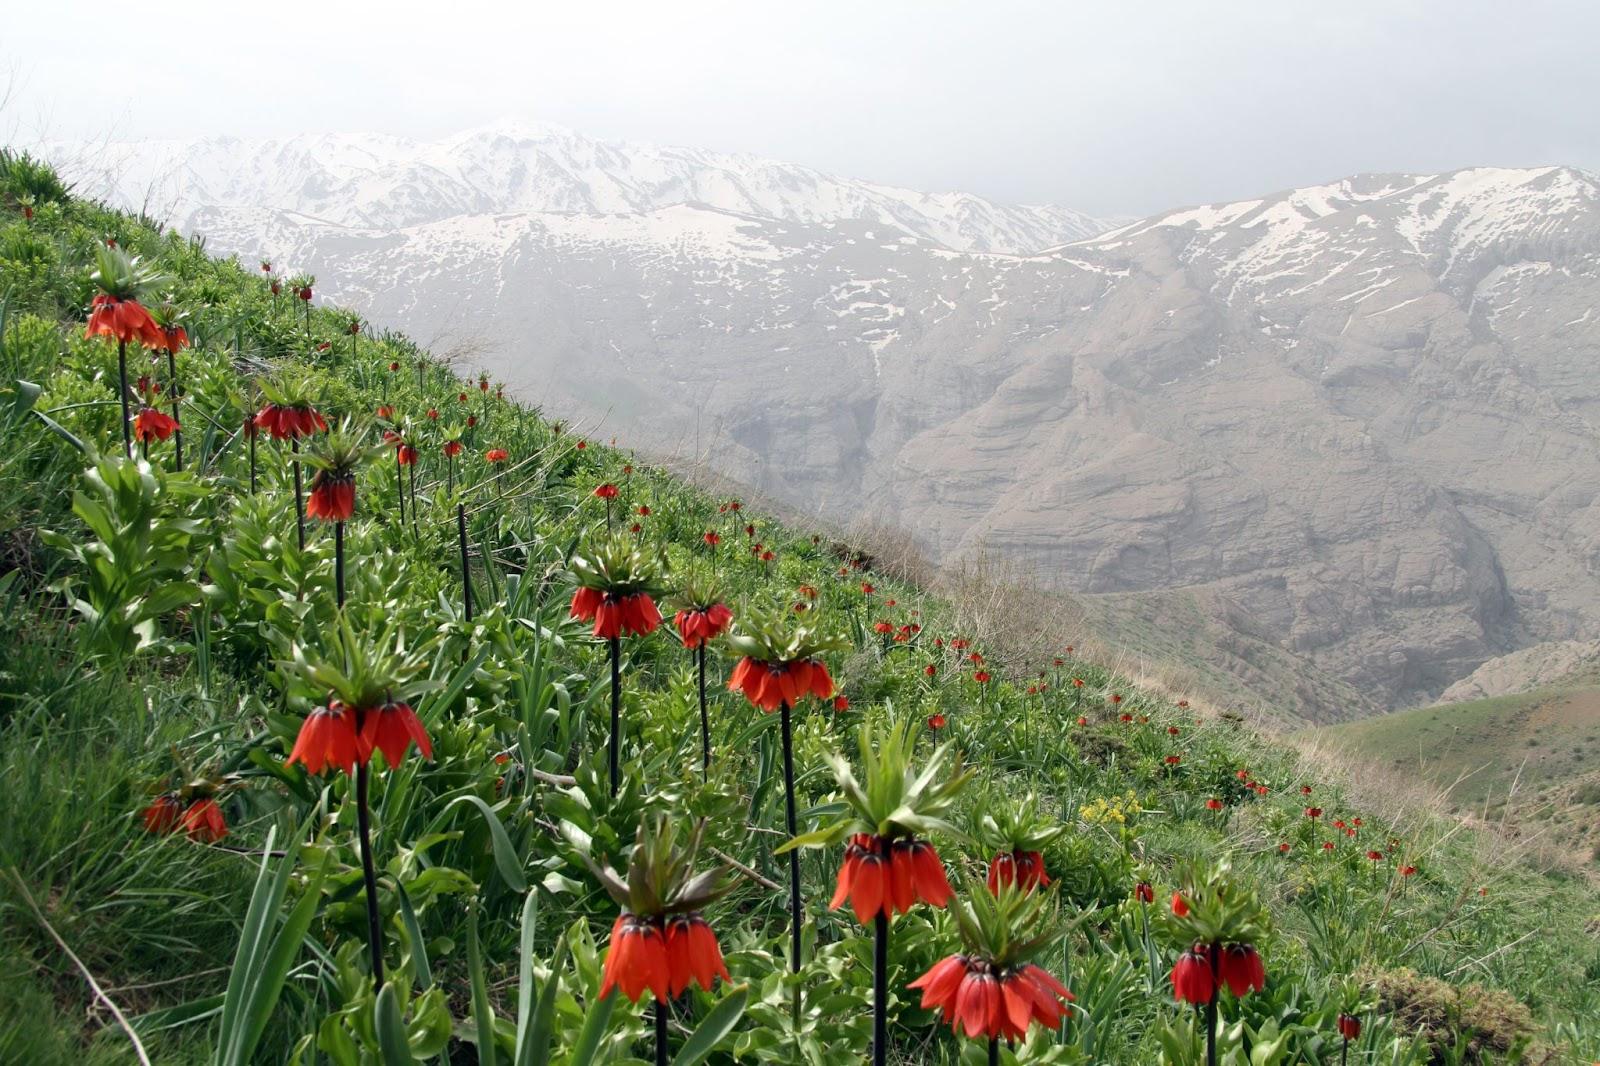 Crown imperials blooming in the mountains © Valery Shanin / Shutterstock